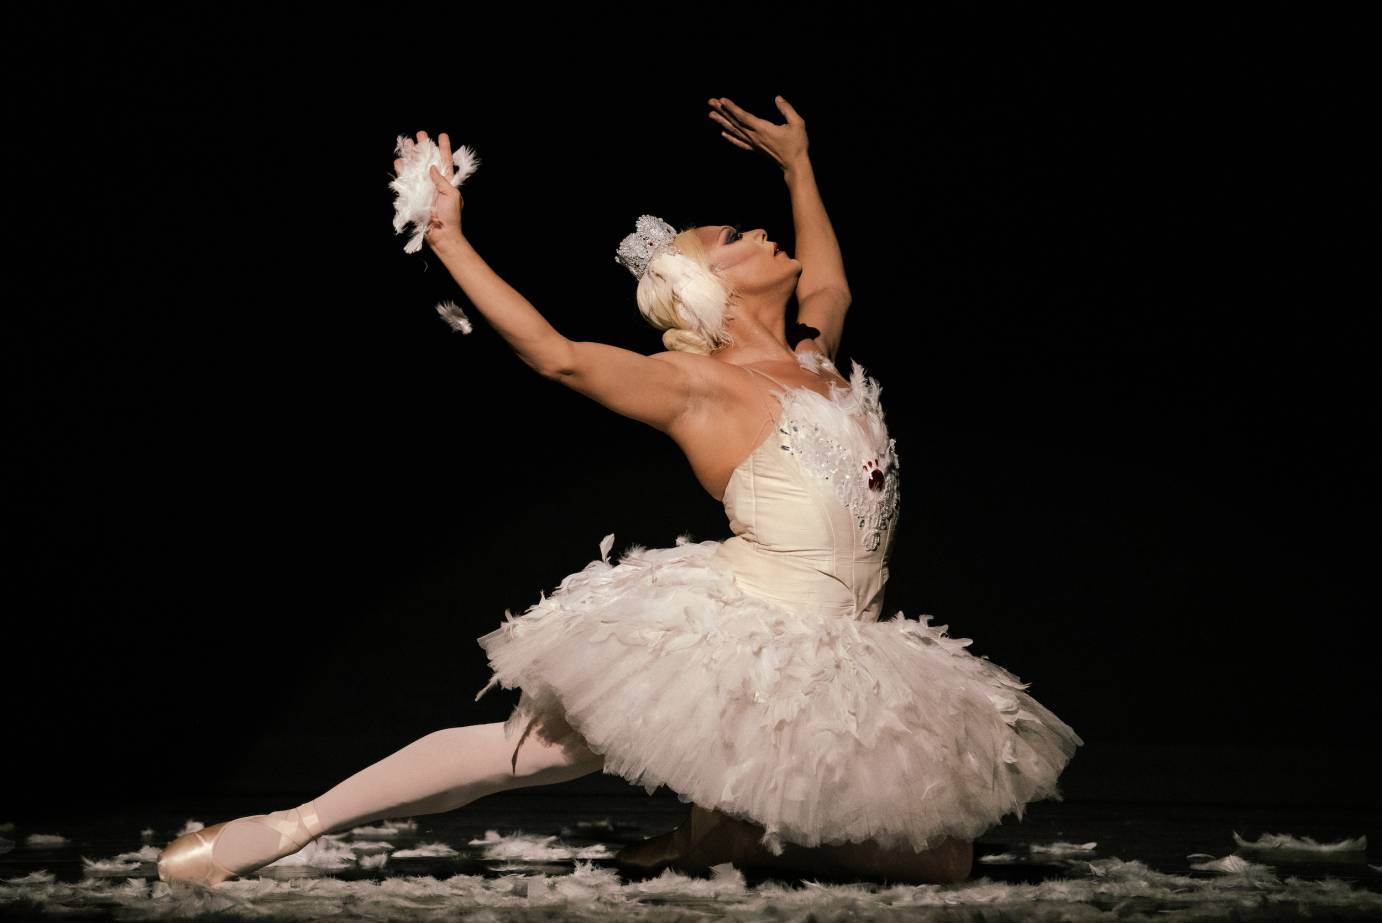 A dancer wearing a swan costume kneels, one leg extended behind and both arms raised. Feathers litter the floor.